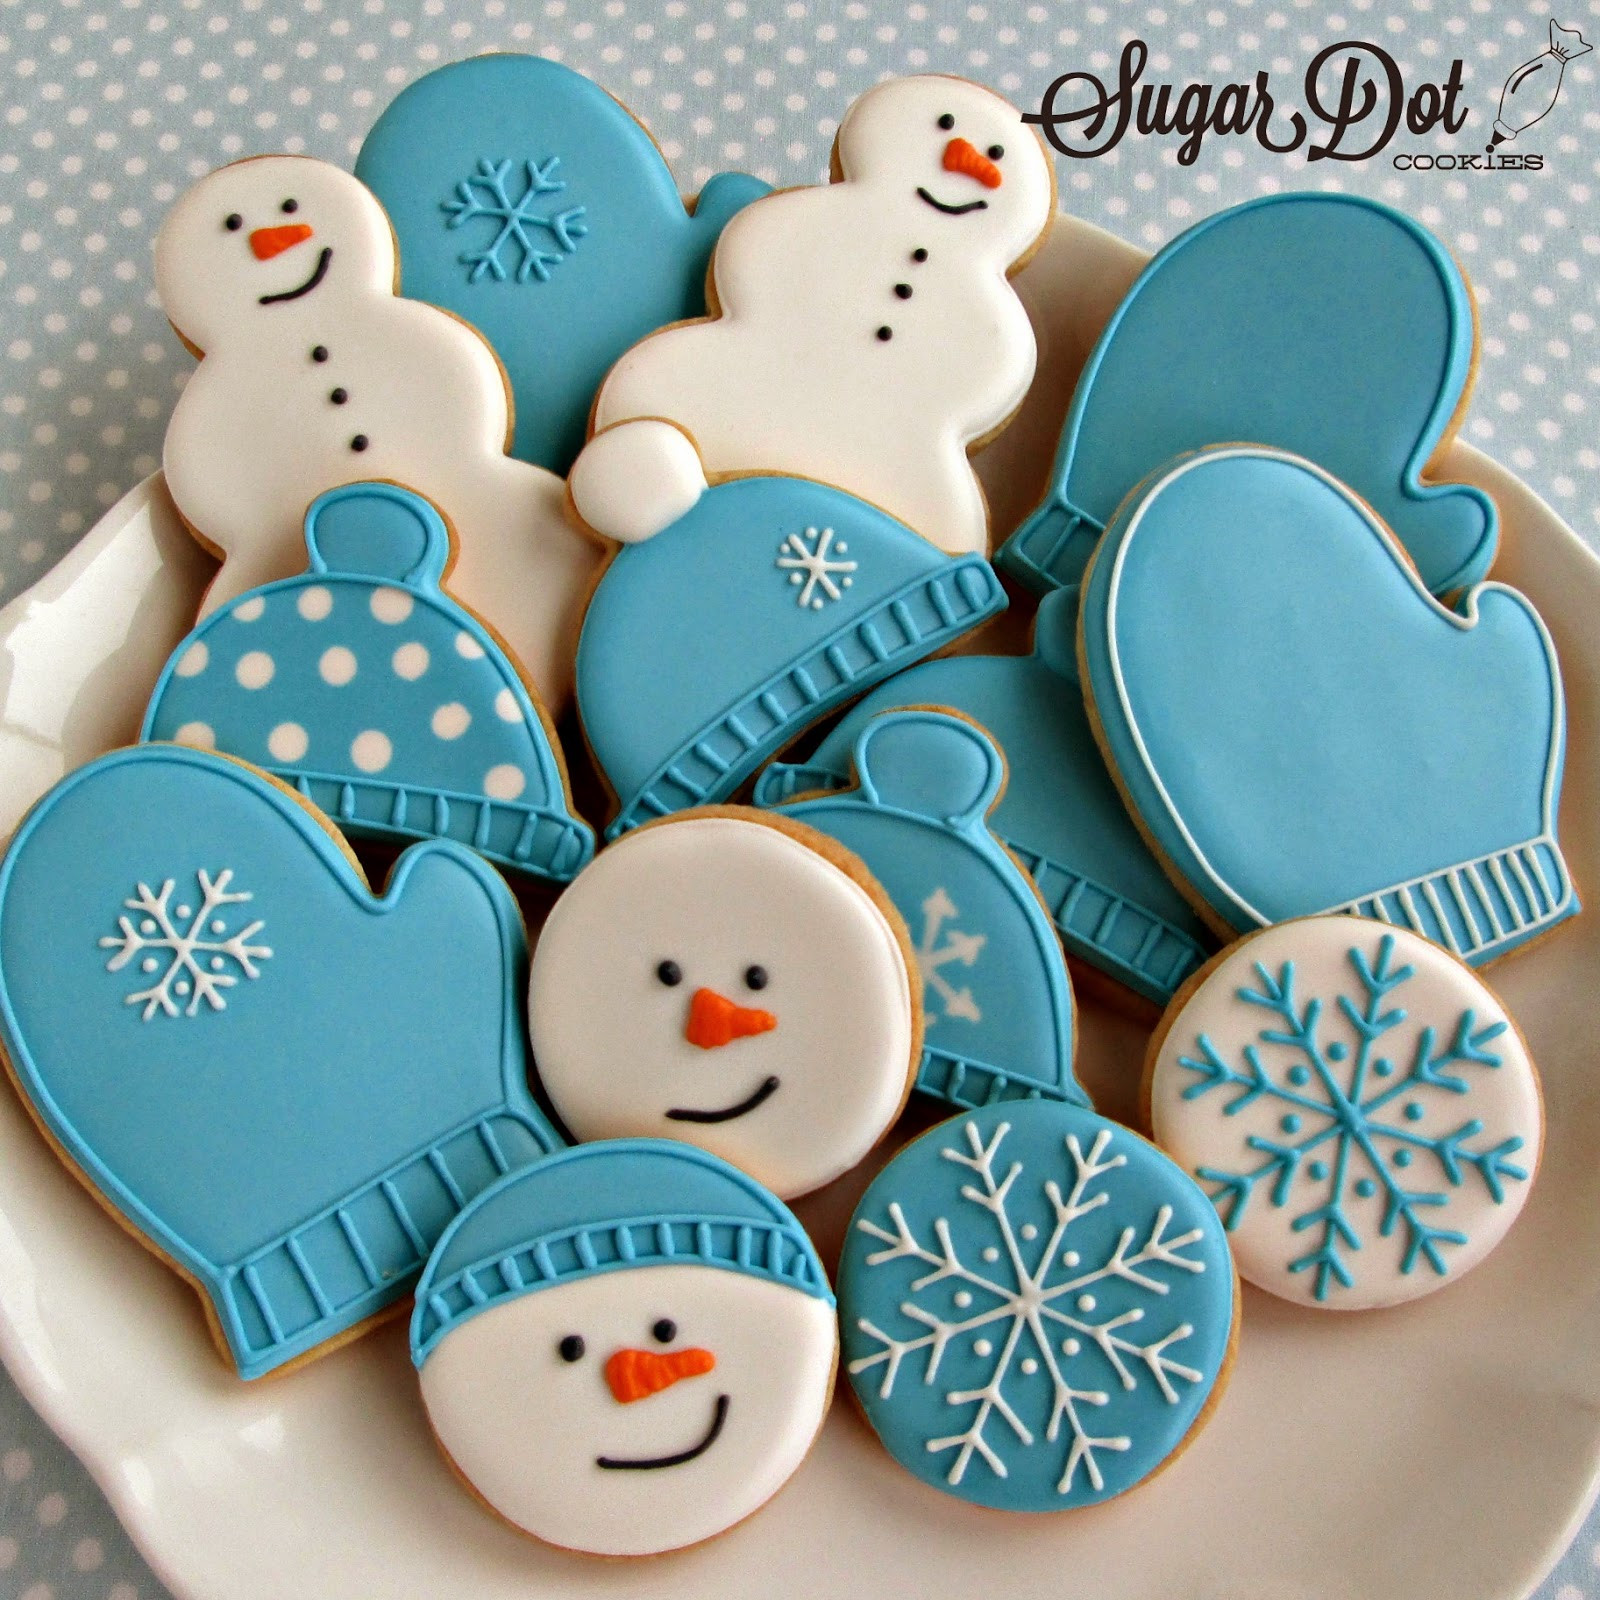 Sugar Cookies For Decorating
 We ll be decorating snowmen snowflakes hats and mittens